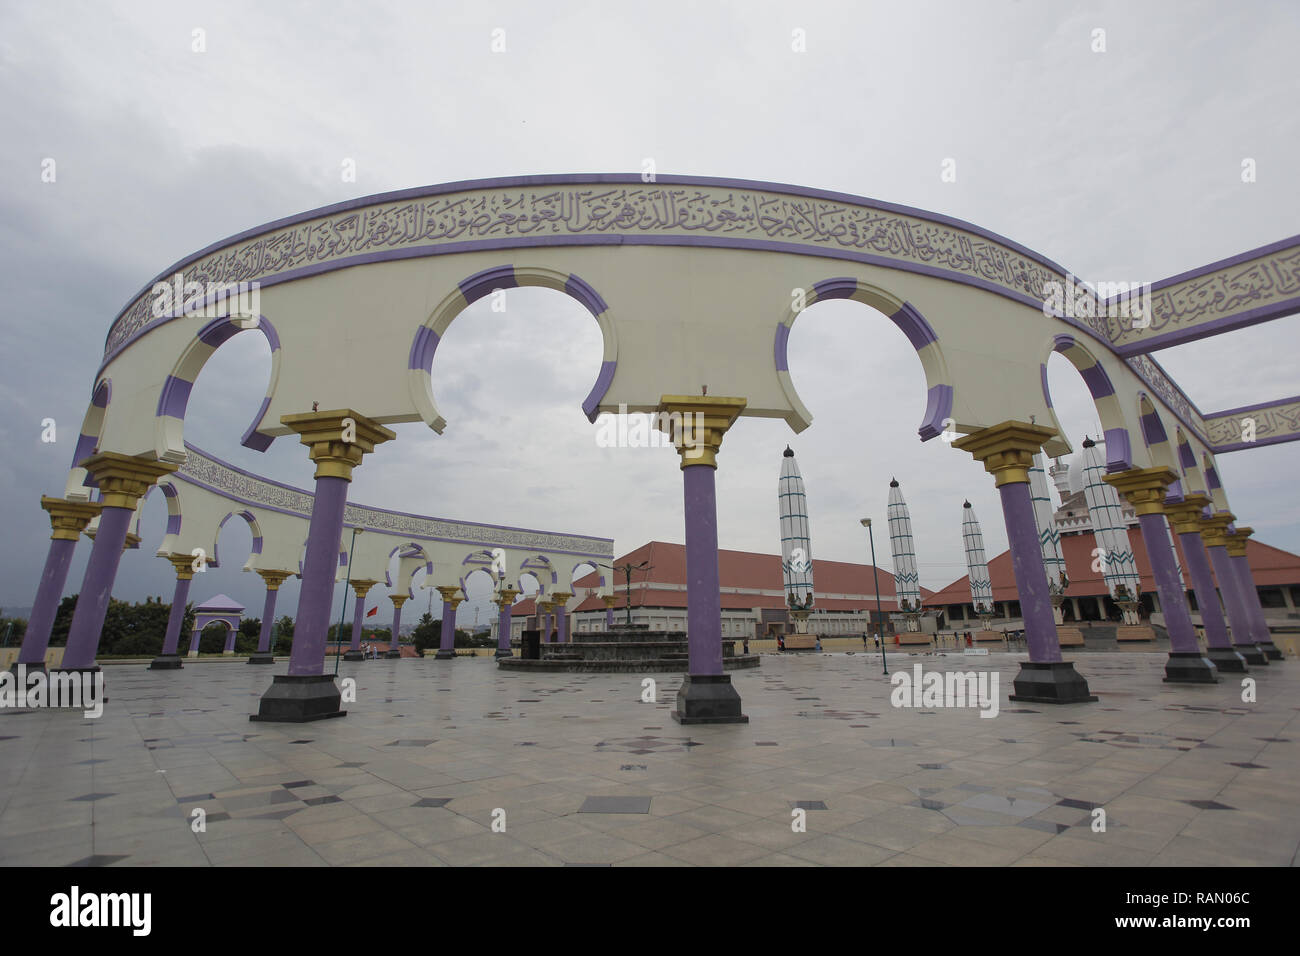 Semarang, Central Java, Indonesia. 2nd Jan, 2019. Residents are seen visiting the Central Java Grand Mosque (MAJT) complex in Semarang, Central Java.The mosque with a capacity of 15,000 worshipers is not only a center of worship and Islamic da'wah, it is also a favourite tourist destination in Semarang because it has a unique architecture with a blend of Javanese, Arabic and Roman styles. Credit: Adriana Adinandra/SOPA Images/ZUMA Wire/Alamy Live News Stock Photo